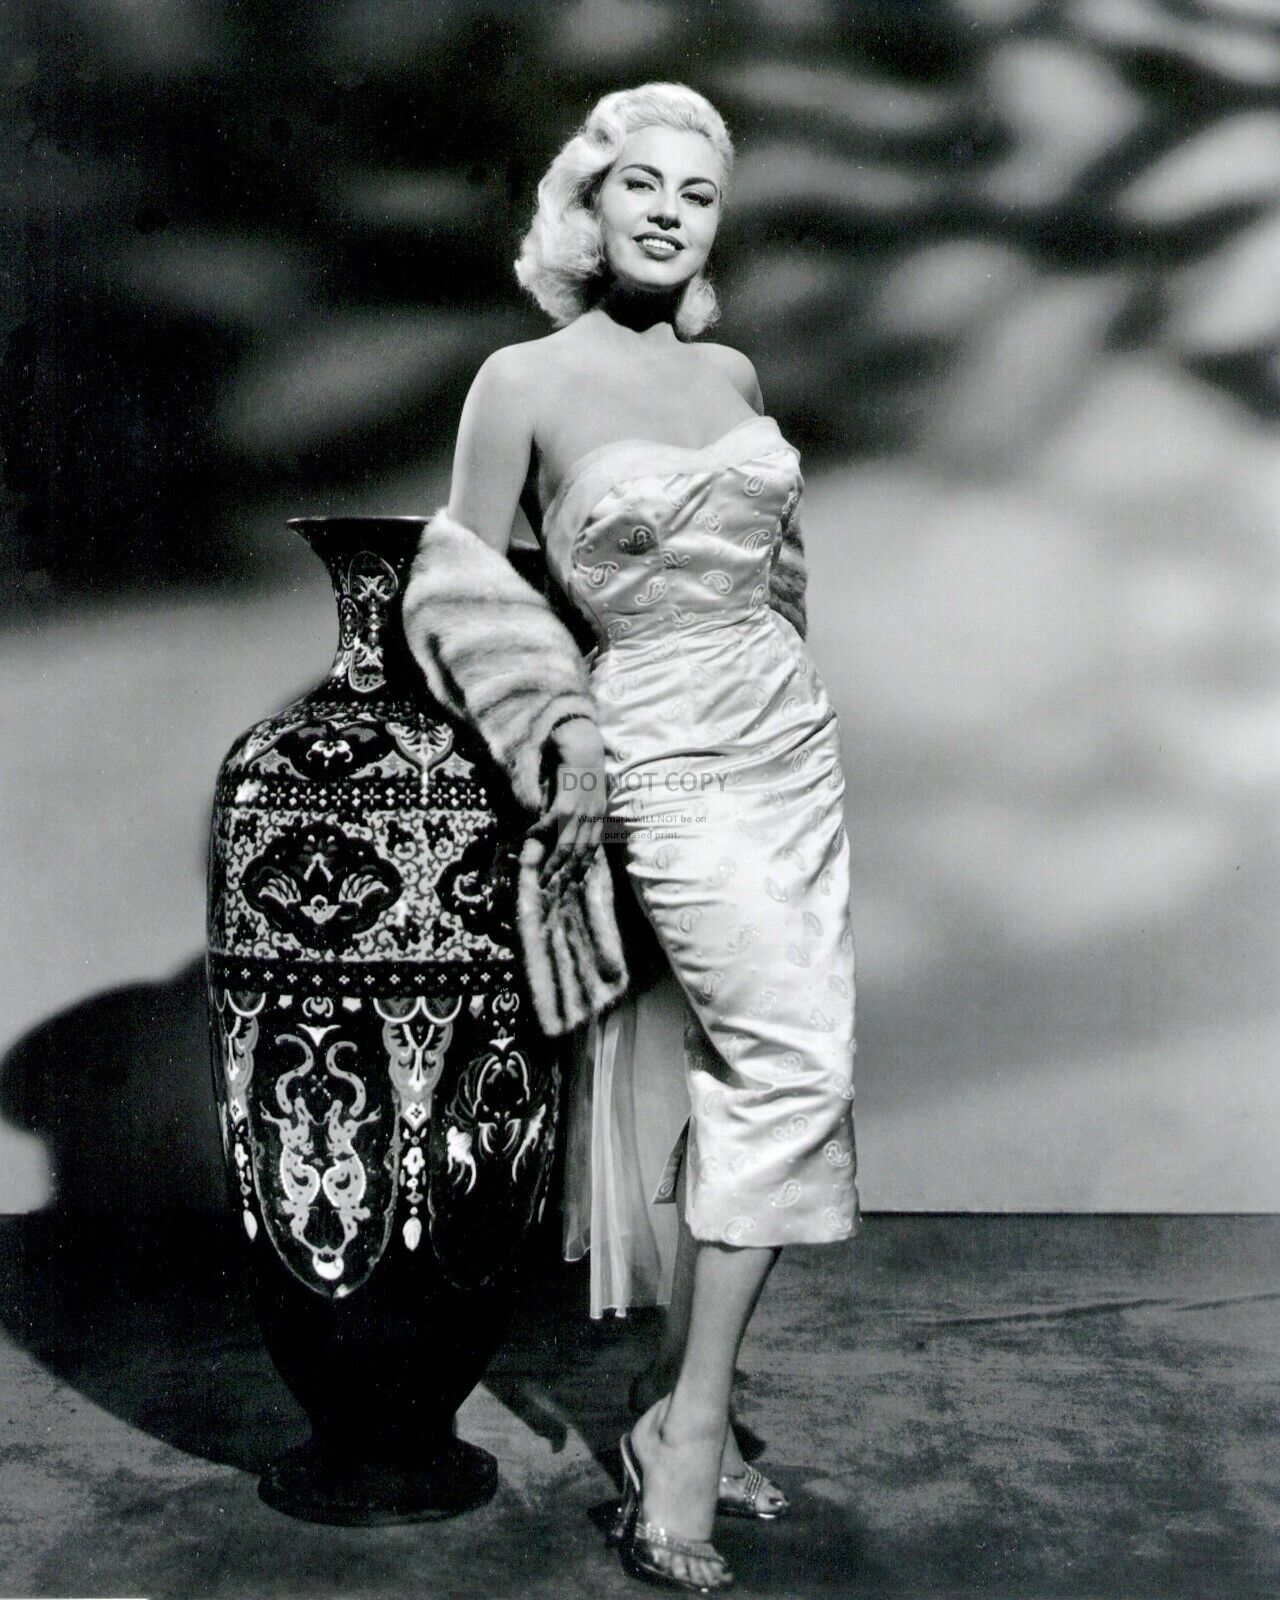 JEANNE CARMEN MODEL AND ACTRESS - 8X10 PUBLICITY PHOTO (MW286)